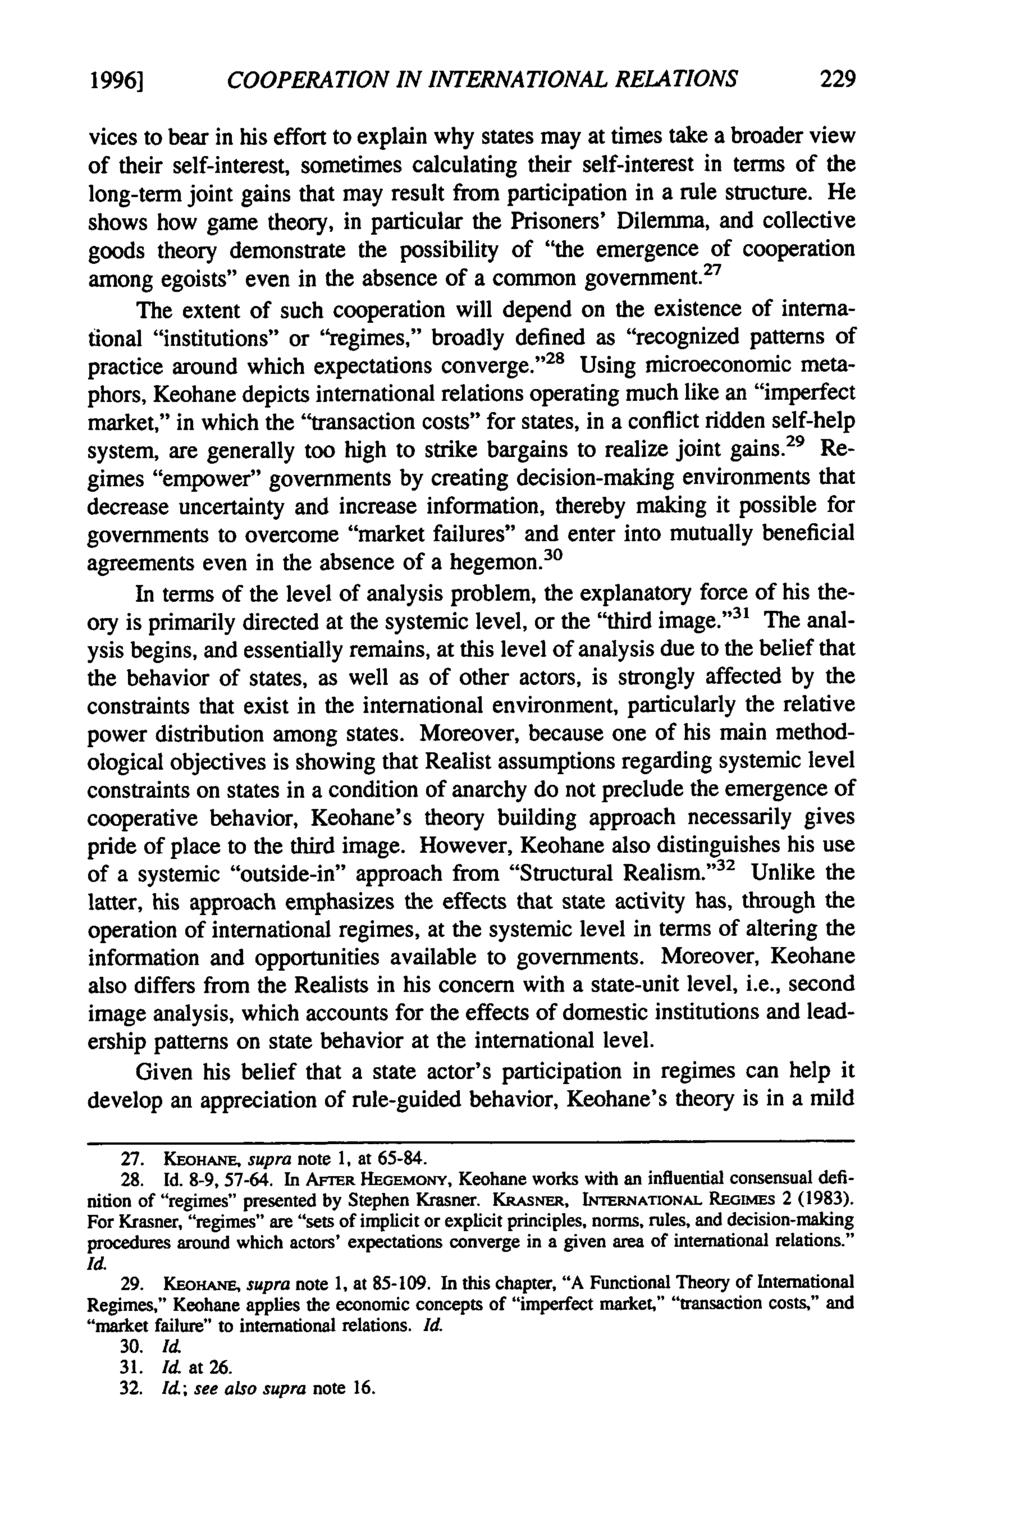 1996] COOPERATION IN INTERNATIONAL RELATIONS vices to bear in his effort to explain why states may at times take a broader view of their self-interest, sometimes calculating their self-interest in